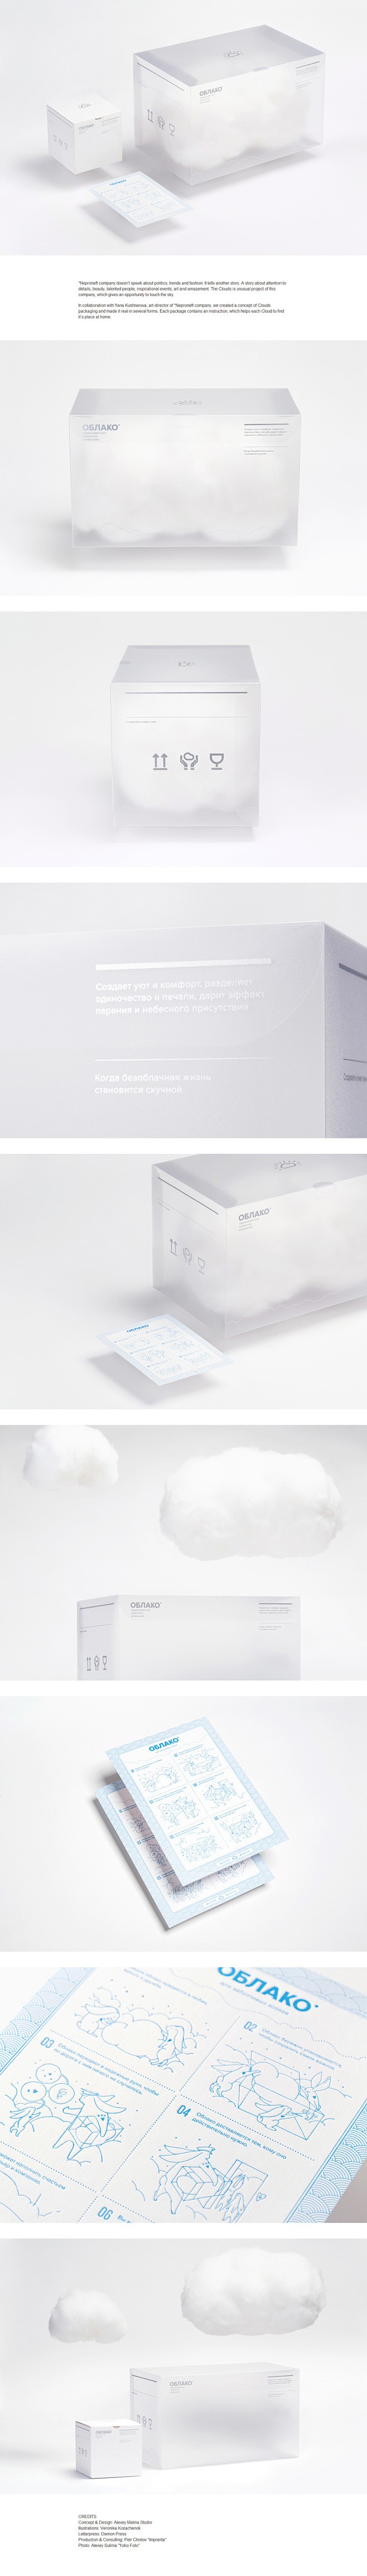 Clouds Packaging by ...